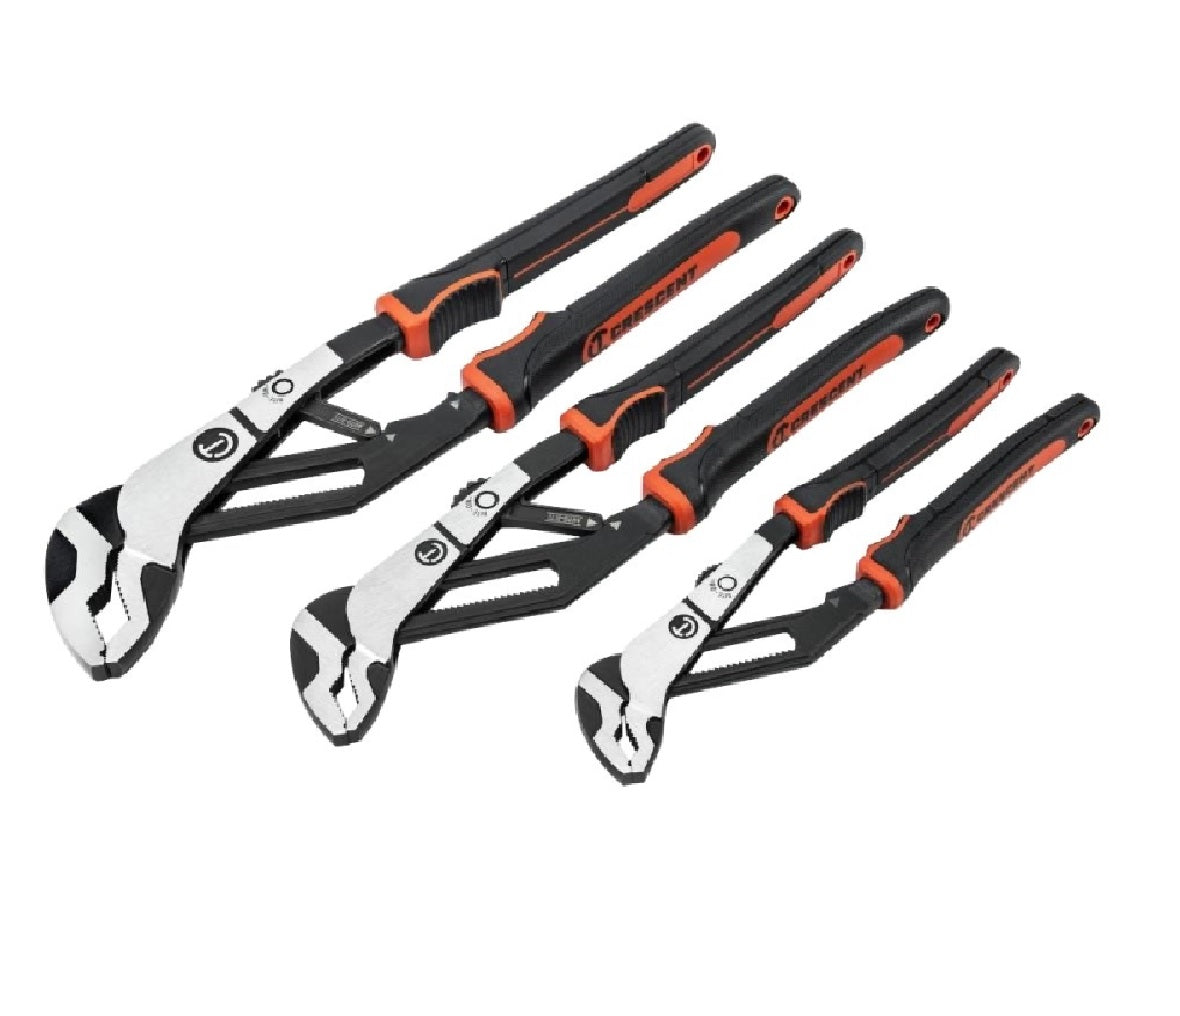 Crescent RTABCGSET3 Tongue and Groove Plier Set, Alloy Steel